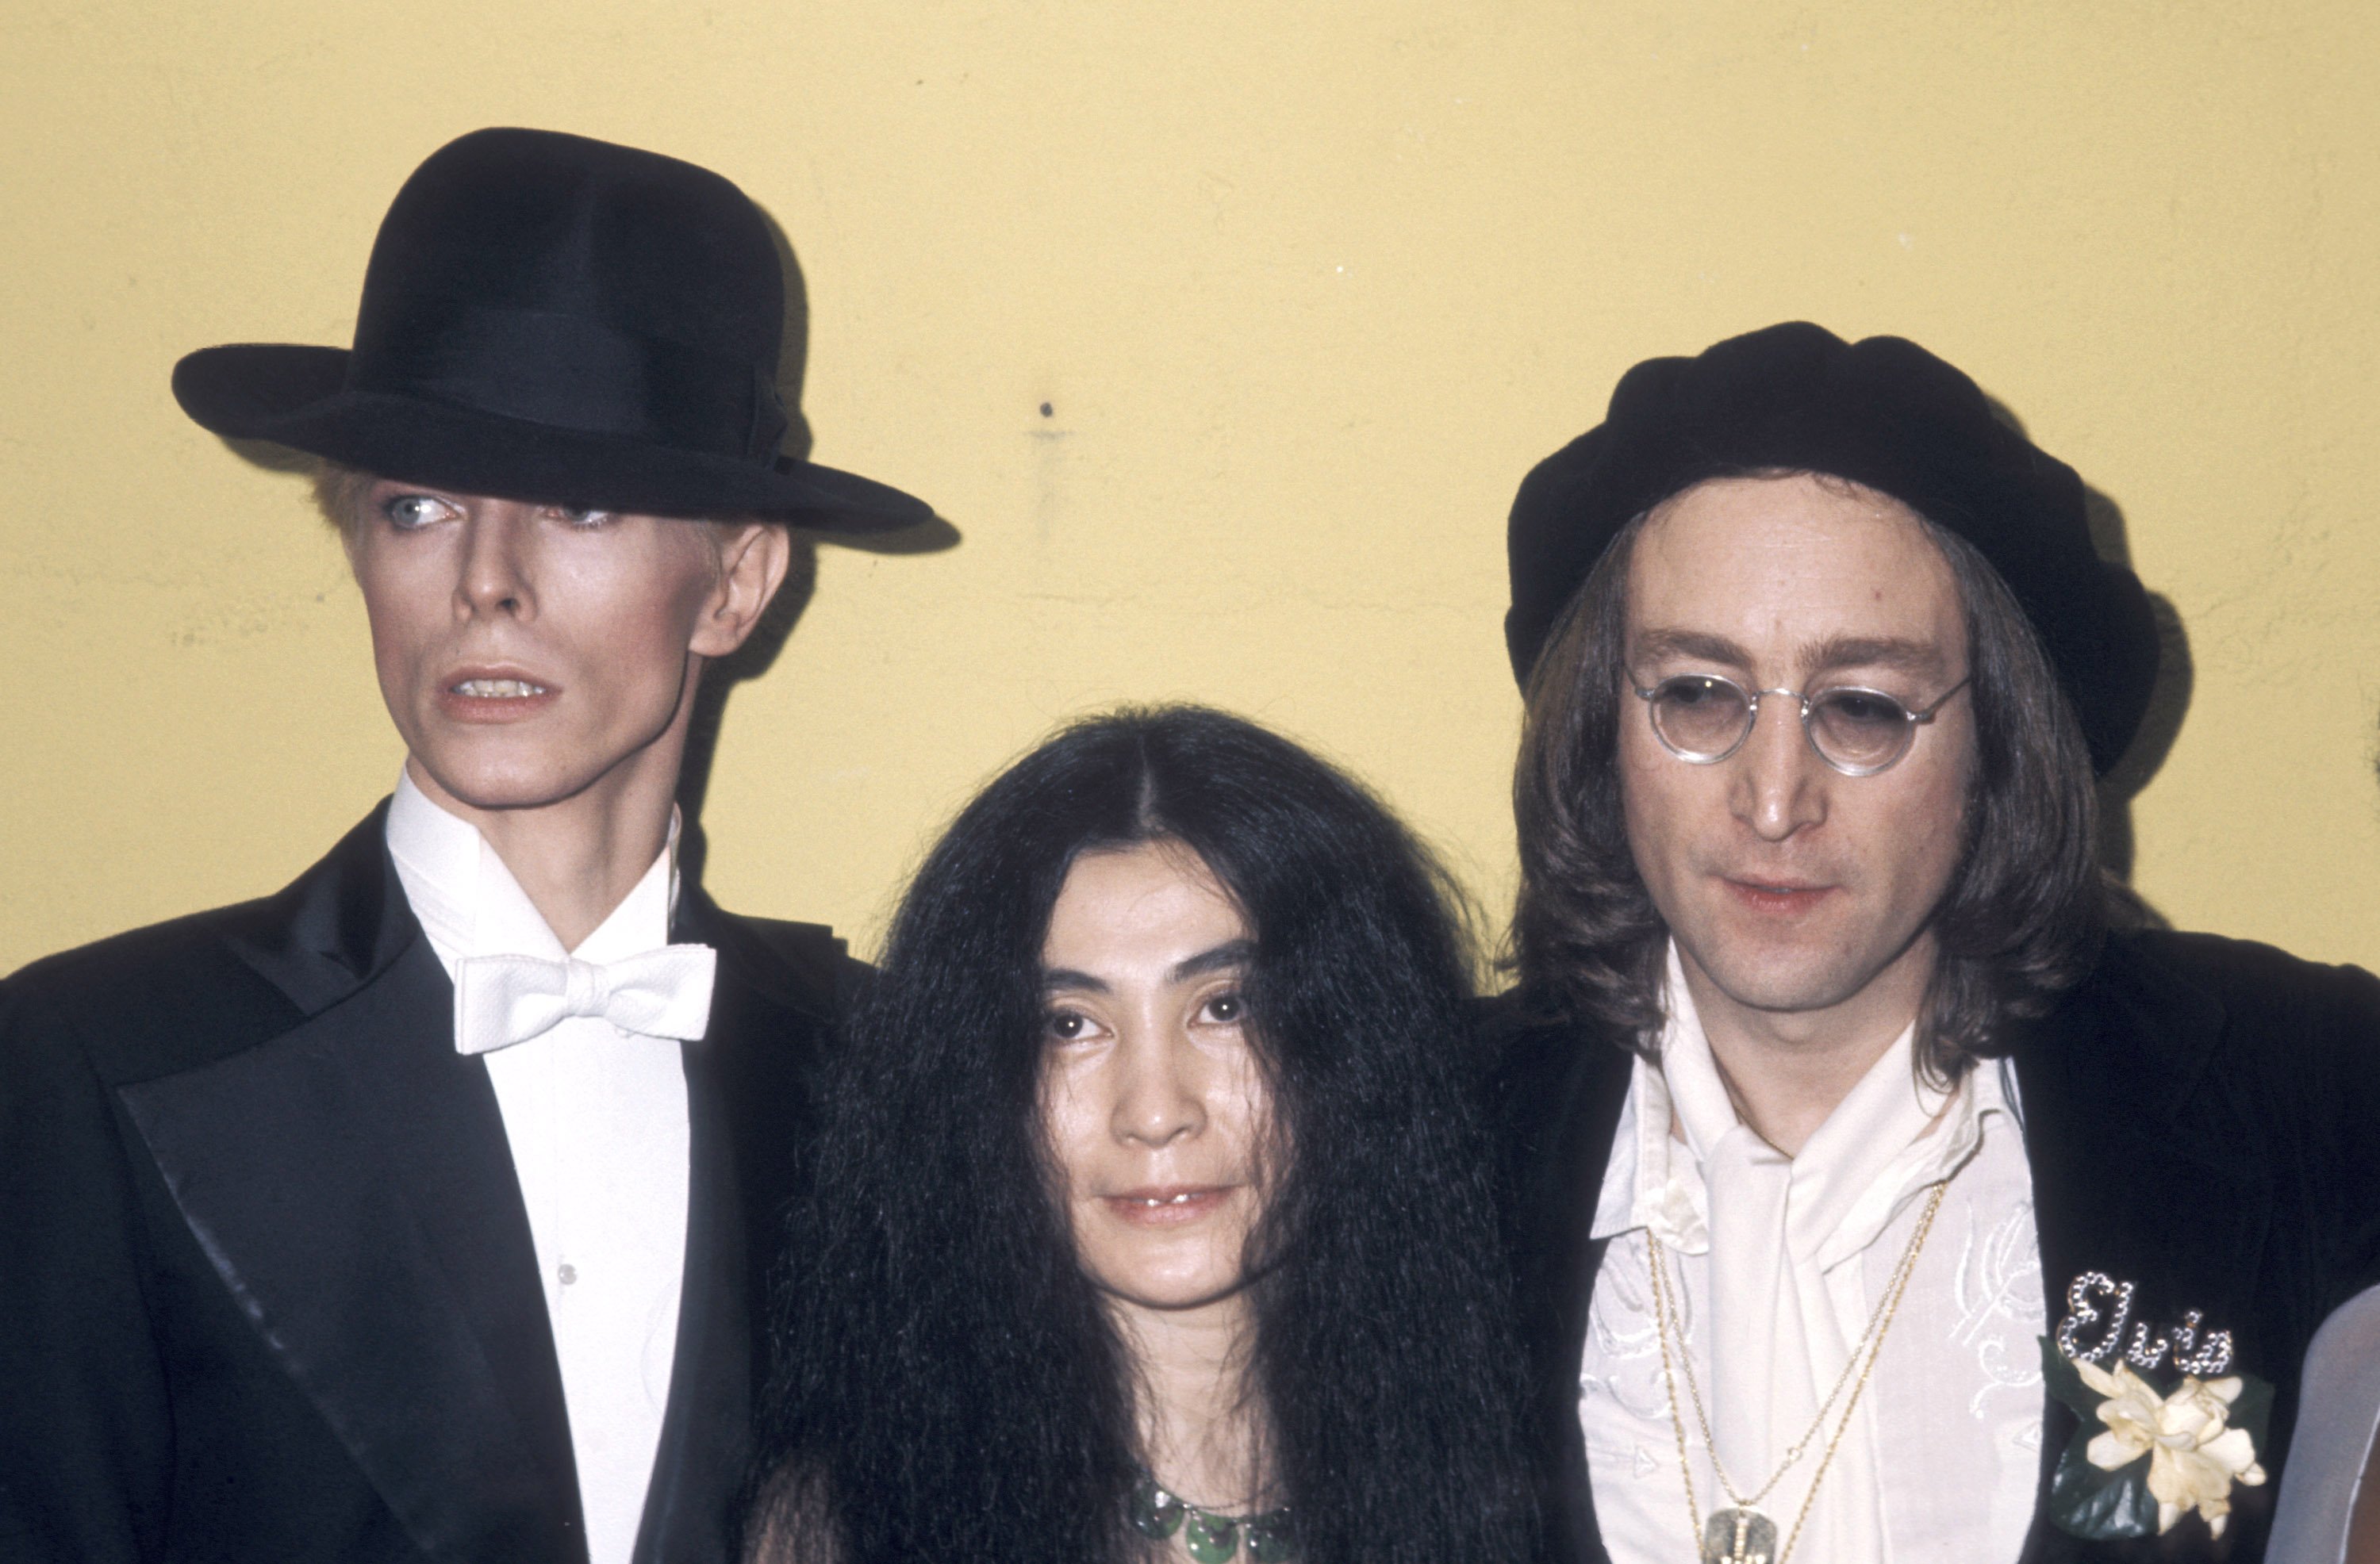 David Bowie, Yoko Ono, and John Lennon wear black and stand in front of a yellow background.